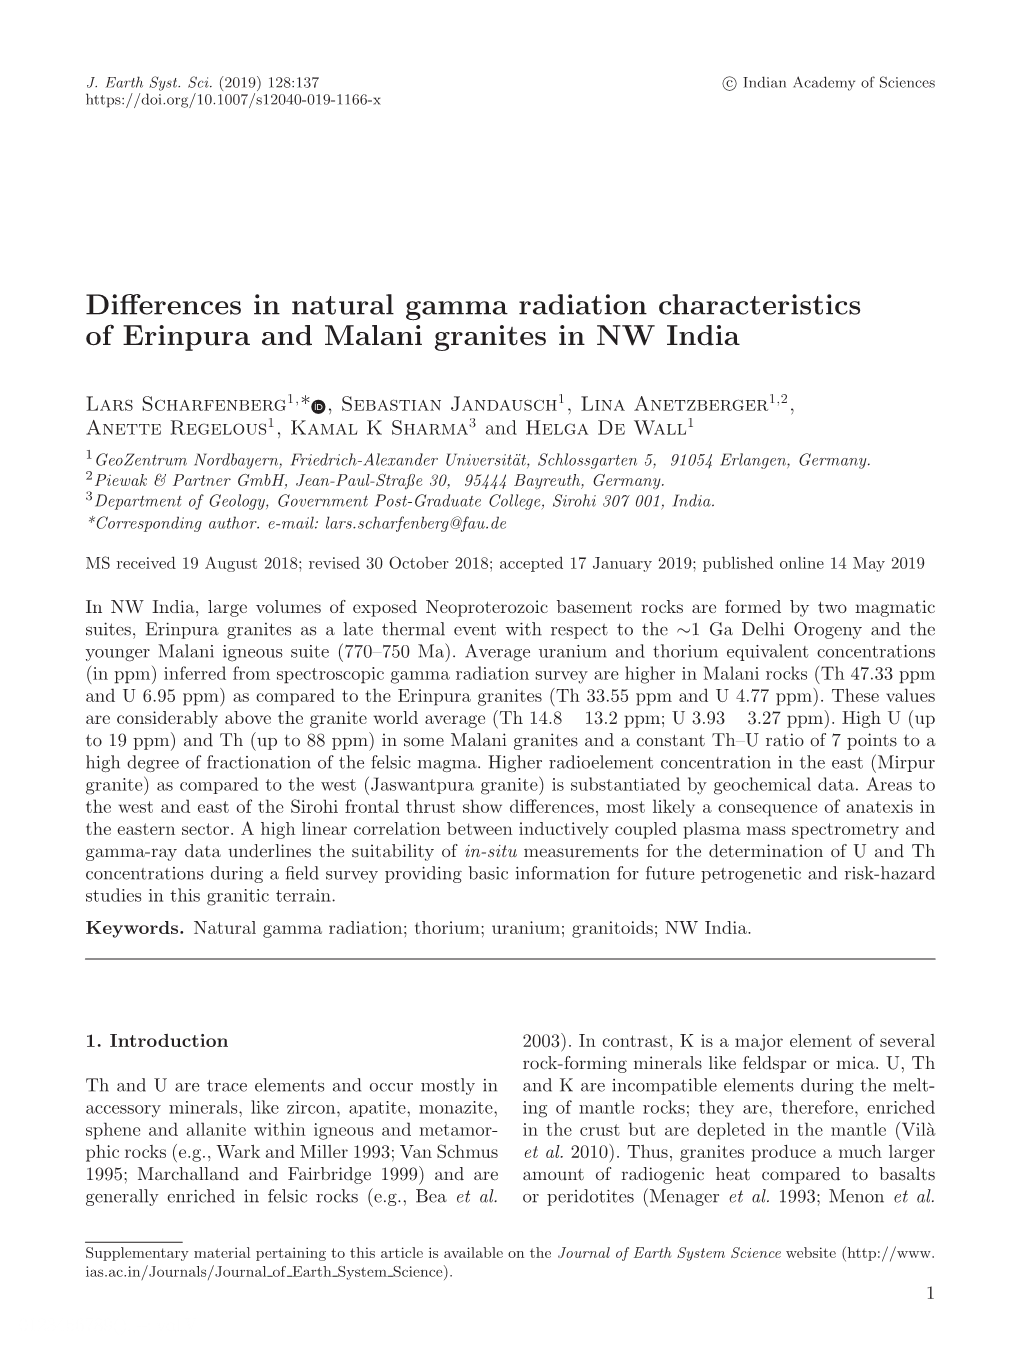 Differences in Natural Gamma Radiation Characteristics of Erinpura